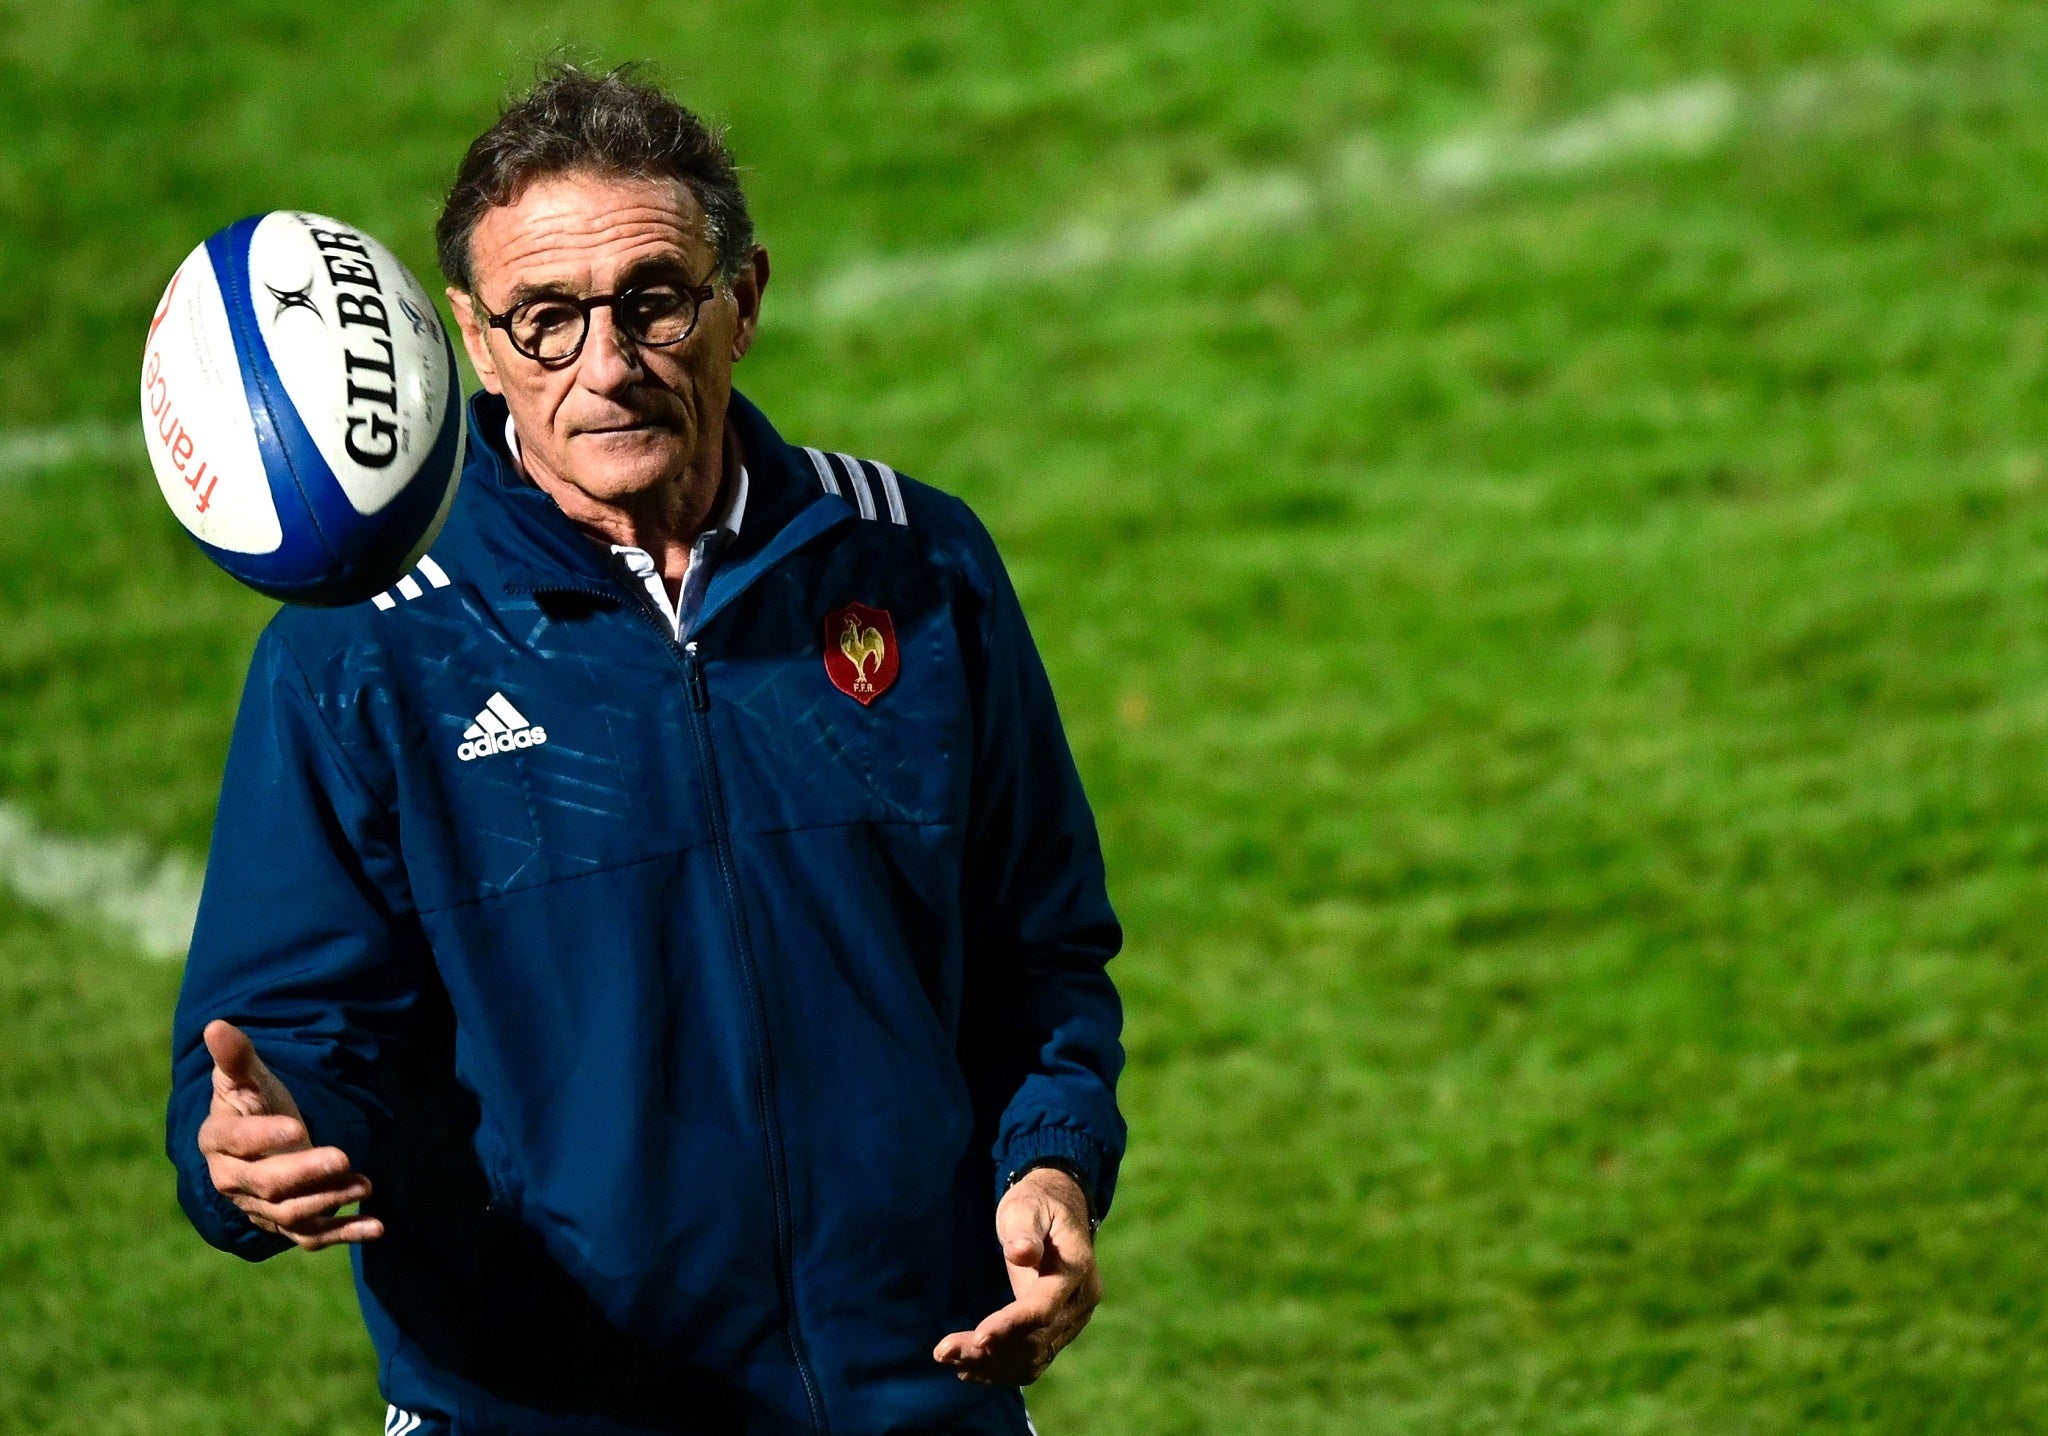 Guy Noves faces a difficult task in the 2017 Six Nations with France travelling to England, Ireland and Italy